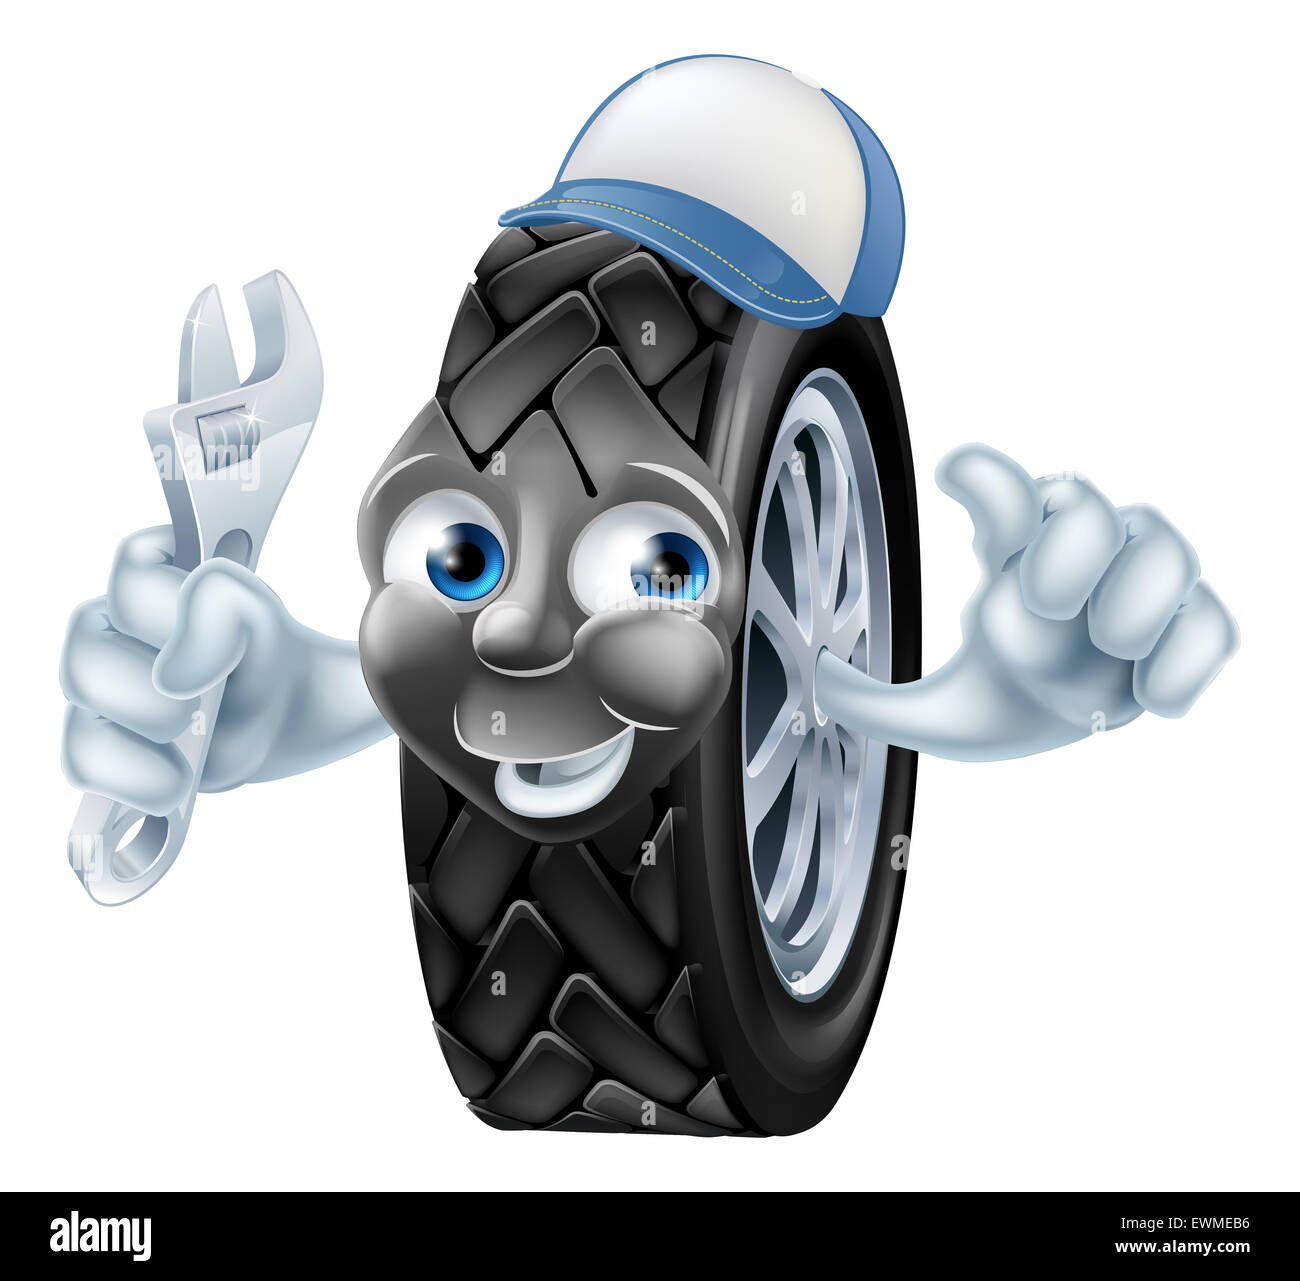 Happy tire mechanic cartoon character holding an adjustable wrench or  spanner and giving thumbs up Stock Photo - Alamy